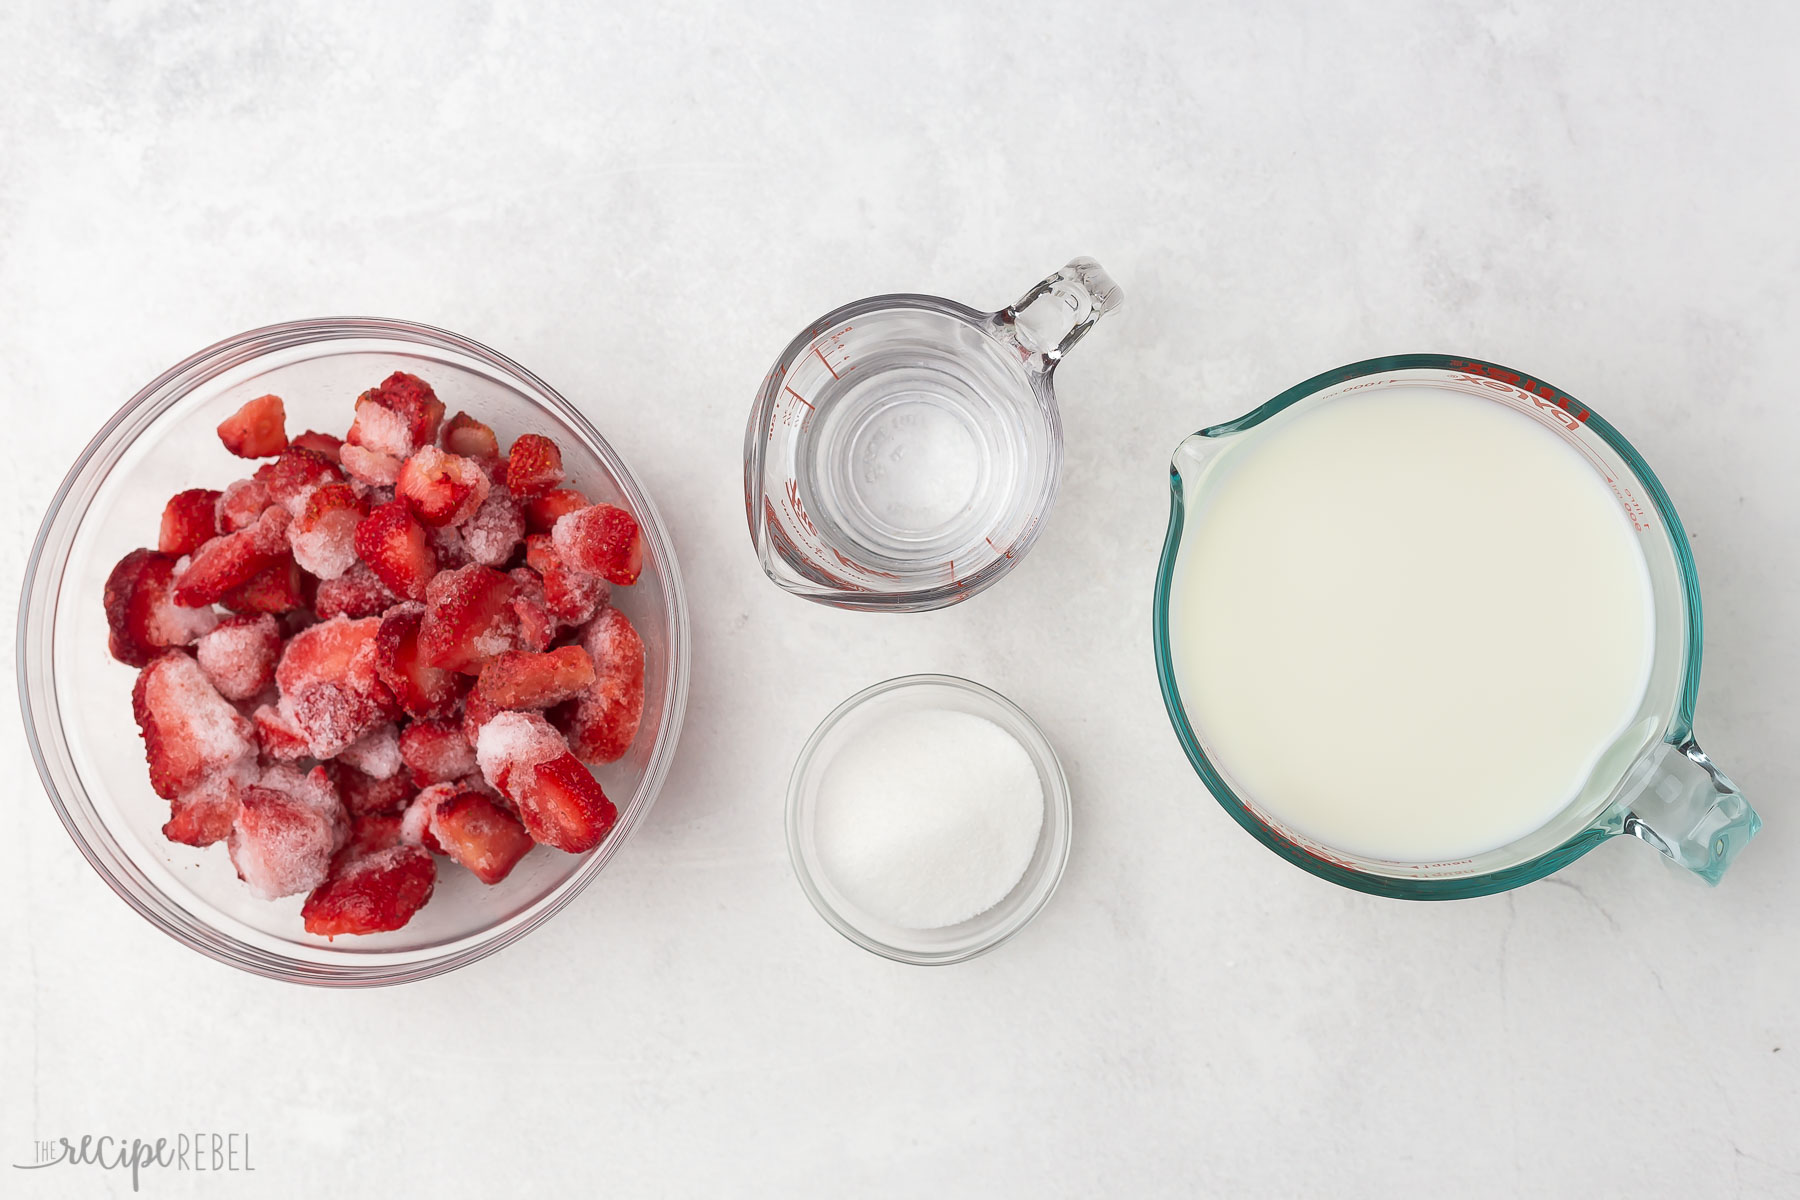 Top view of ingredients for strawberry milk in glass bowls.